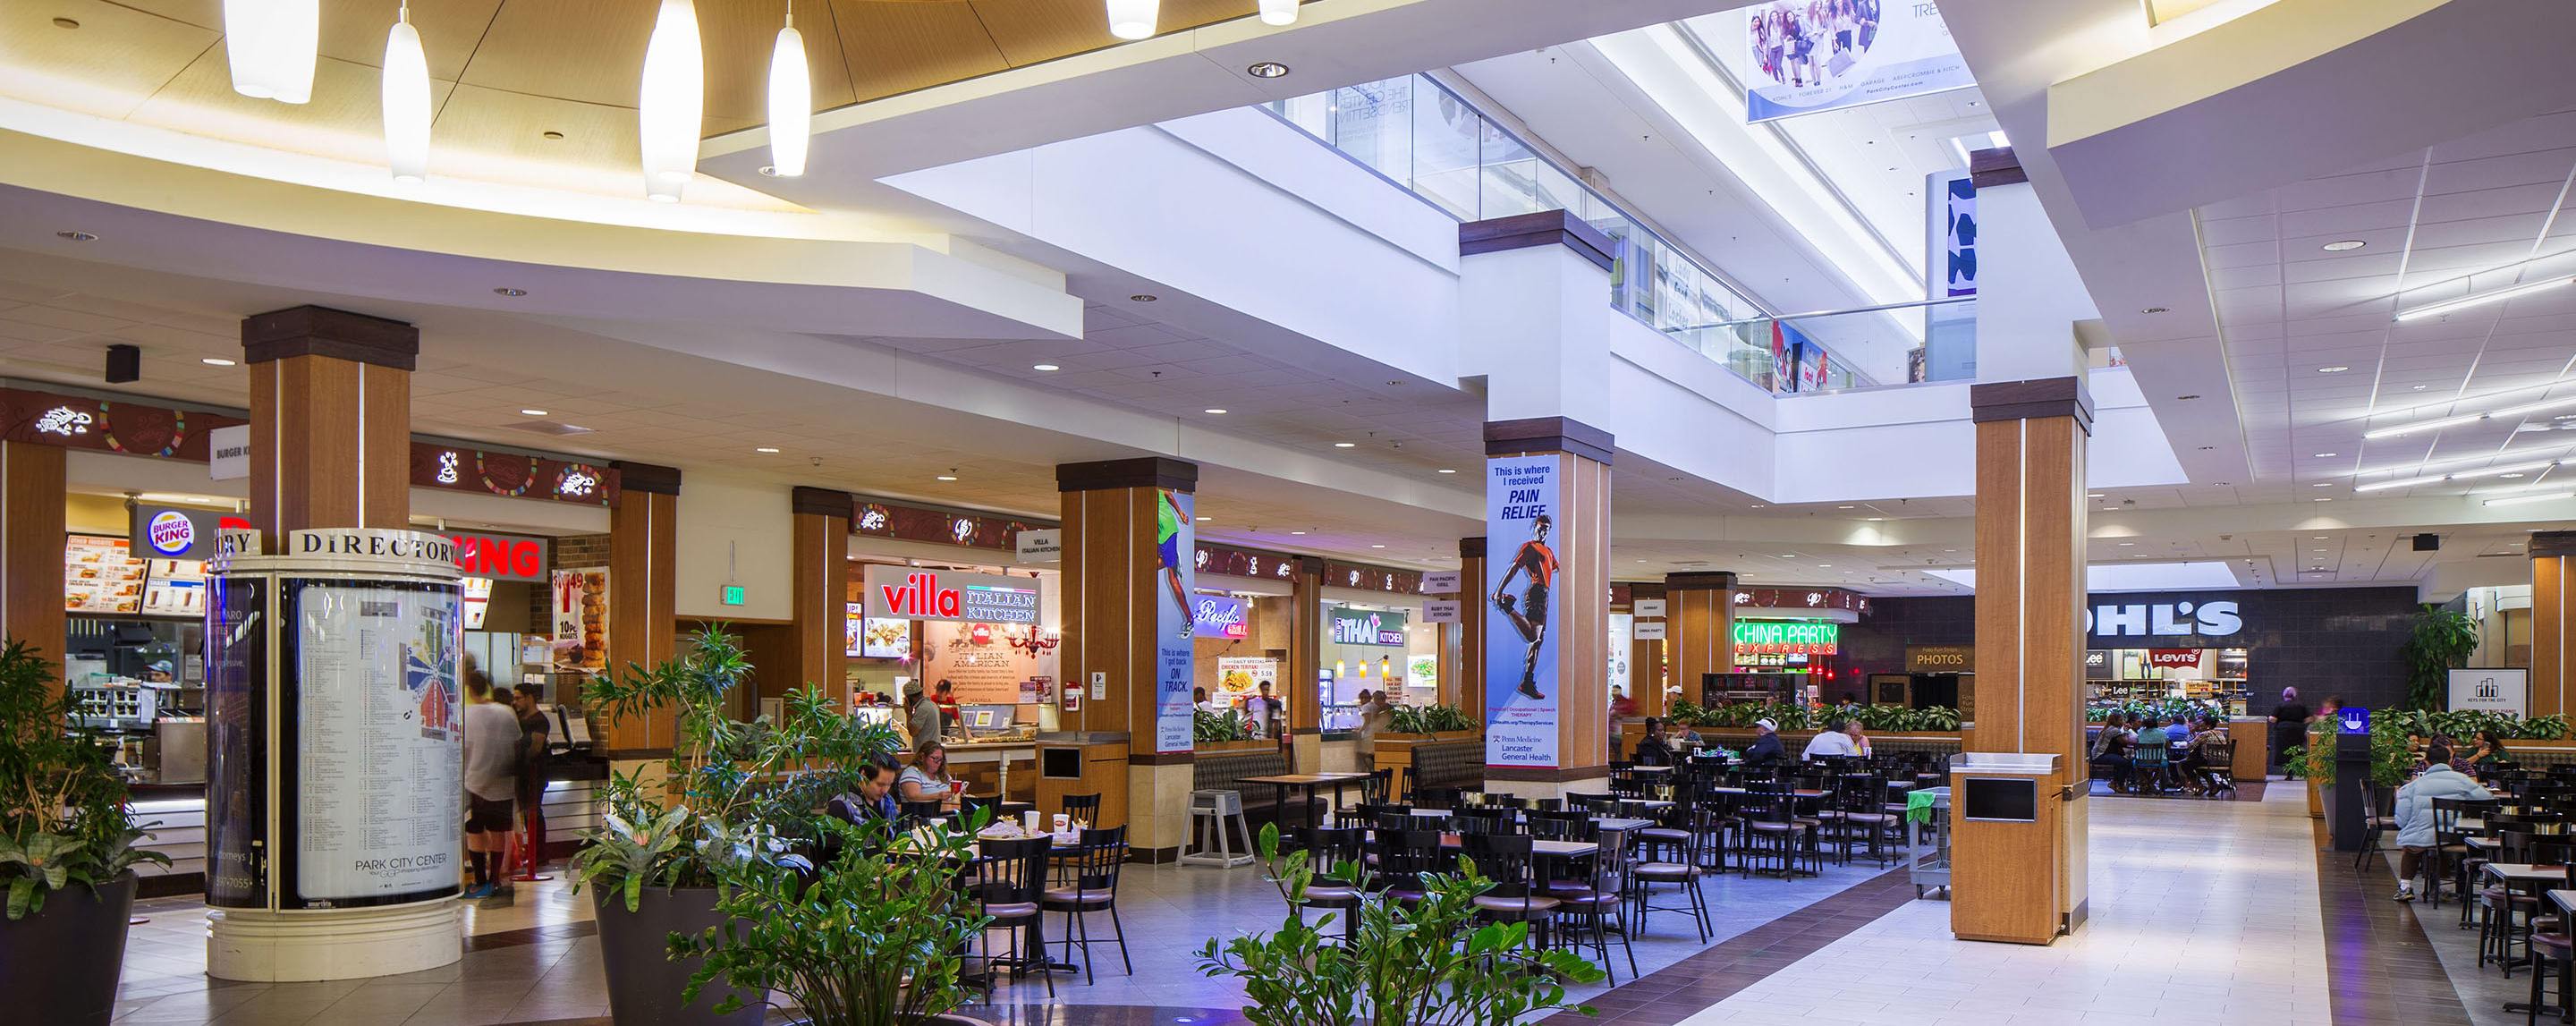 Several rows of empty tables stand in a mall food court. A sign for Kohl's is visible in the background.